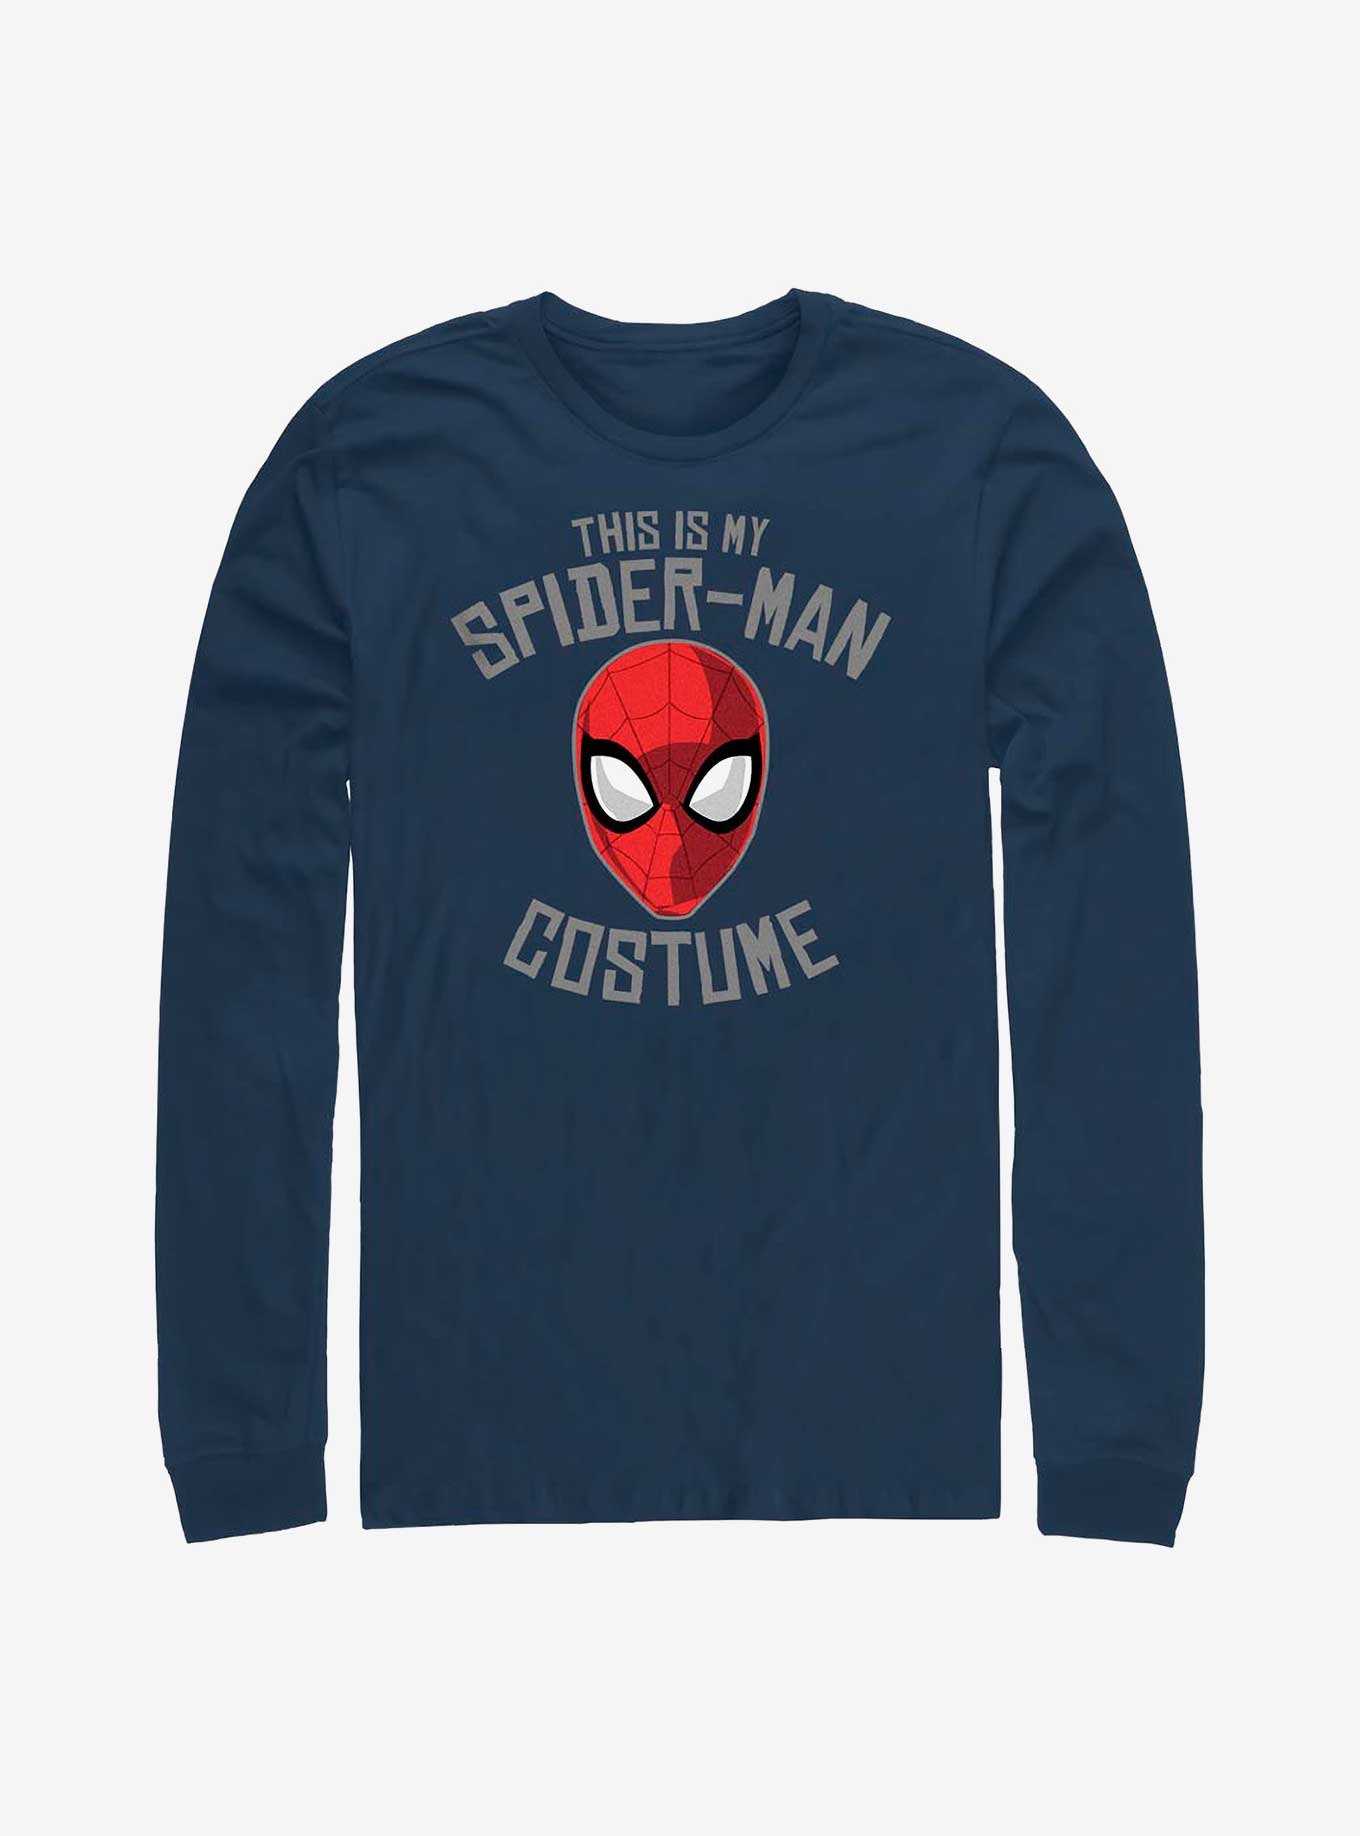 Marvel Spider-Man This Is My Costume Long-Sleeve T-Shirt, , hi-res